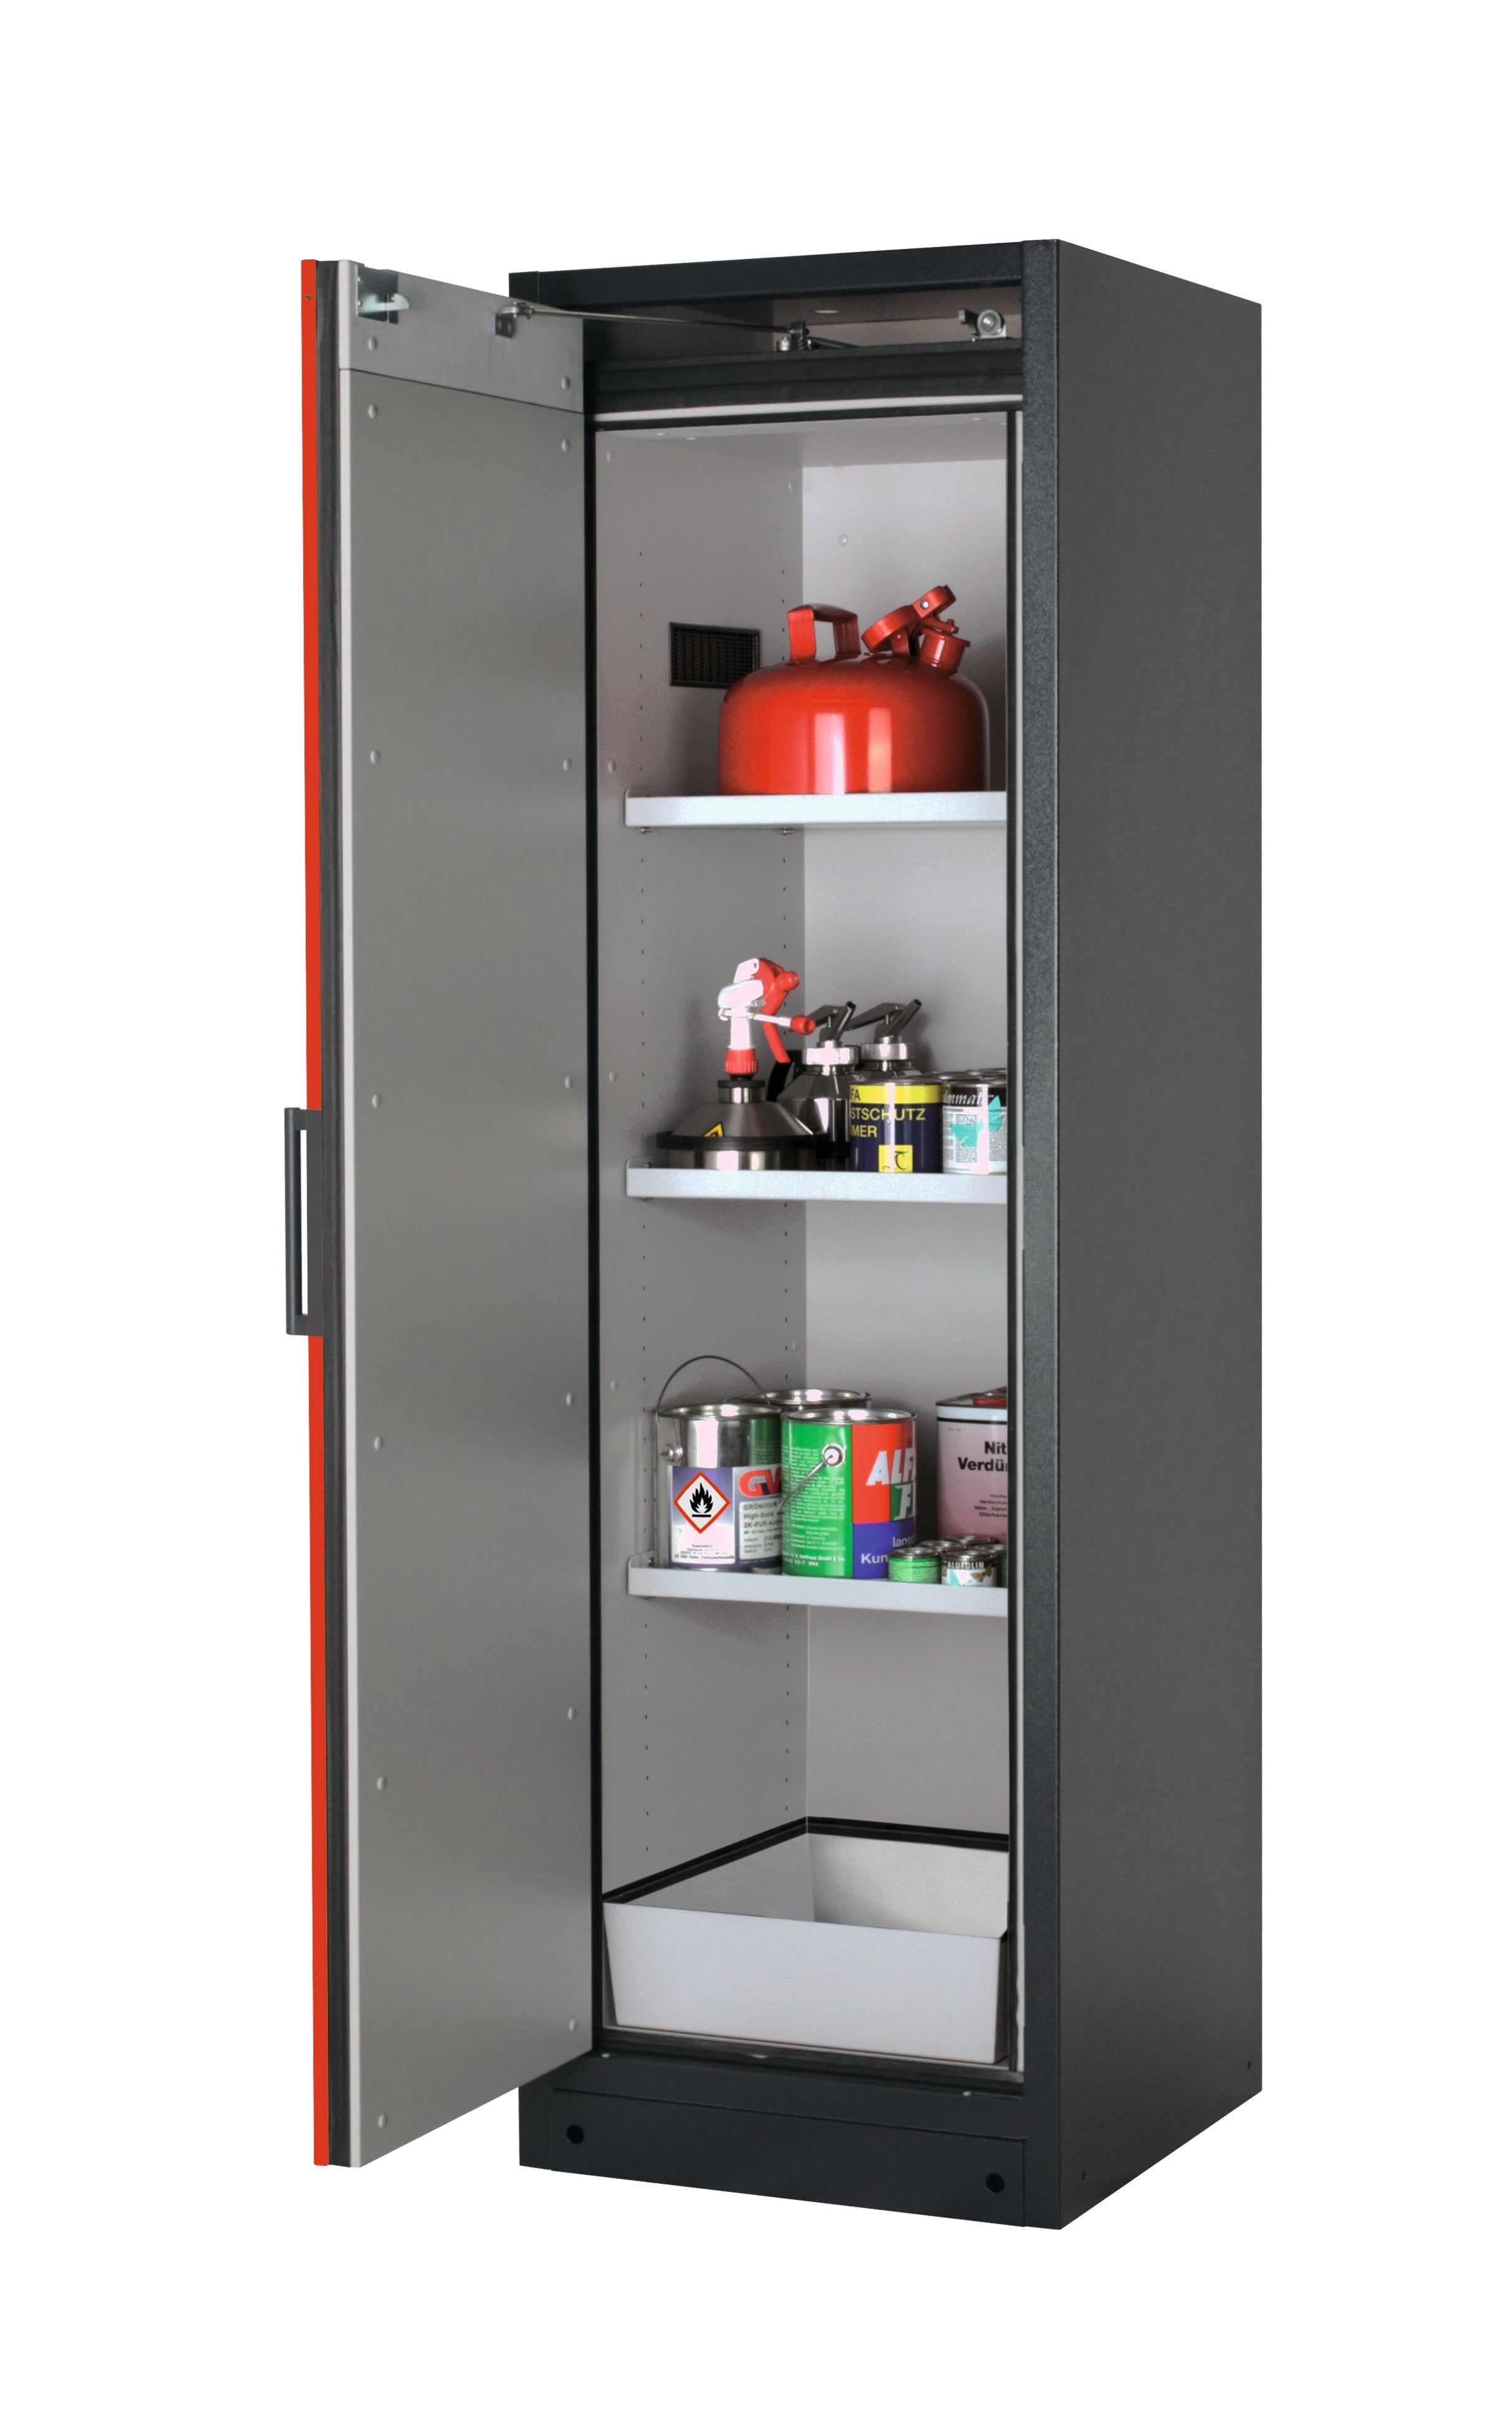 Type 90 safety storage cabinet Q-PEGASUS-90 model Q90.195.060.WDAC in traffic red RAL 3020 with 3x shelf standard (sheet steel),